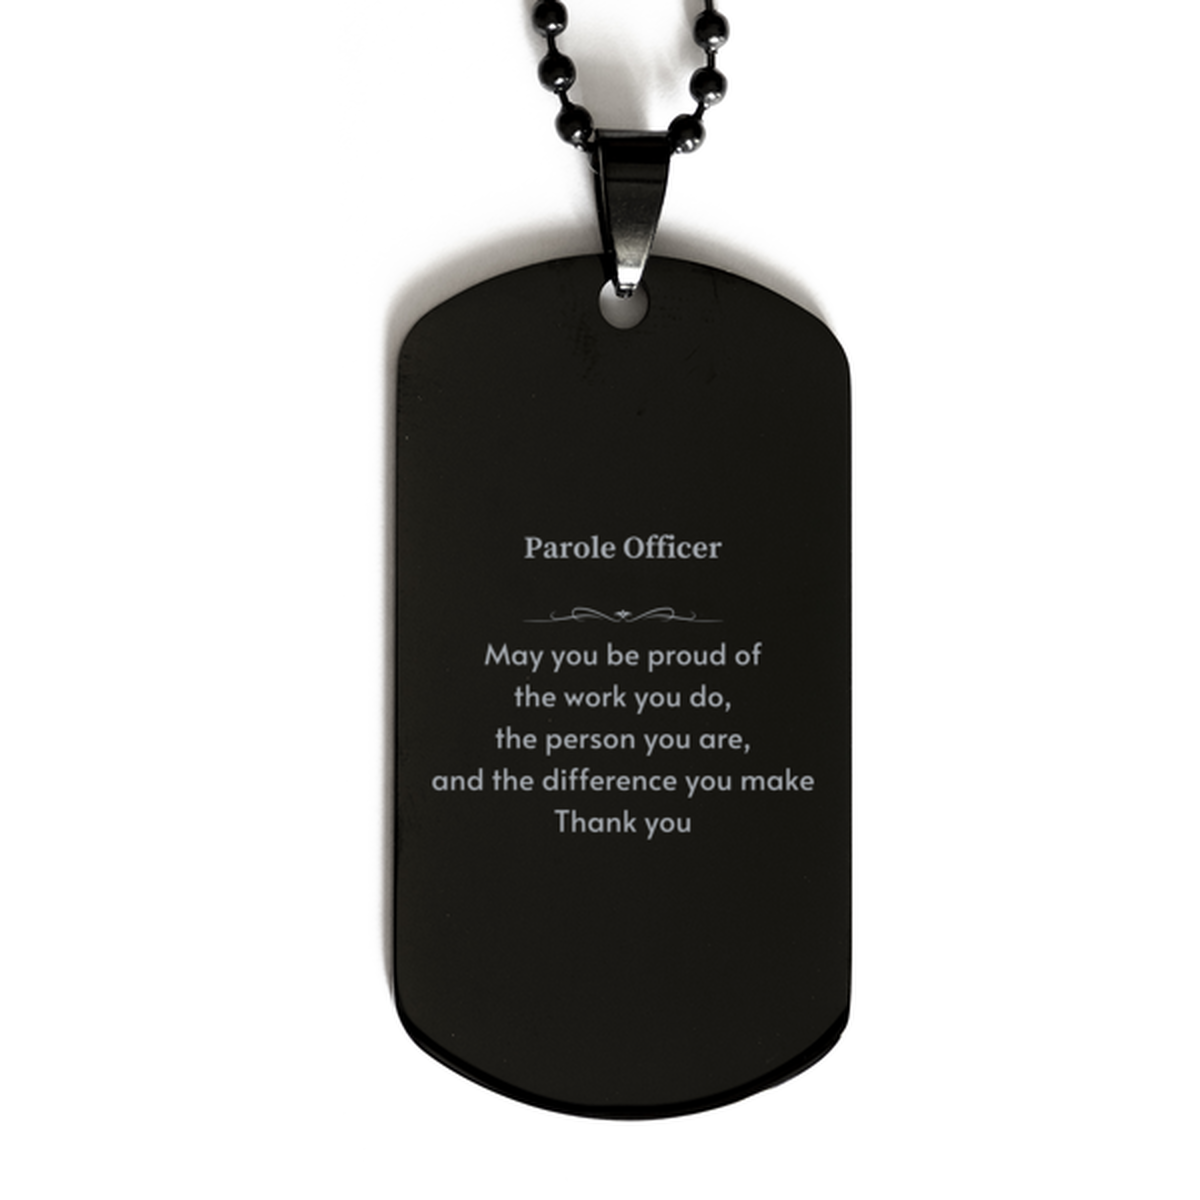 Heartwarming Black Dog Tag Retirement Coworkers Gifts for Parole Officer, Parole Officer May You be proud of the work you do, the person you are Gifts for Boss Men Women Friends